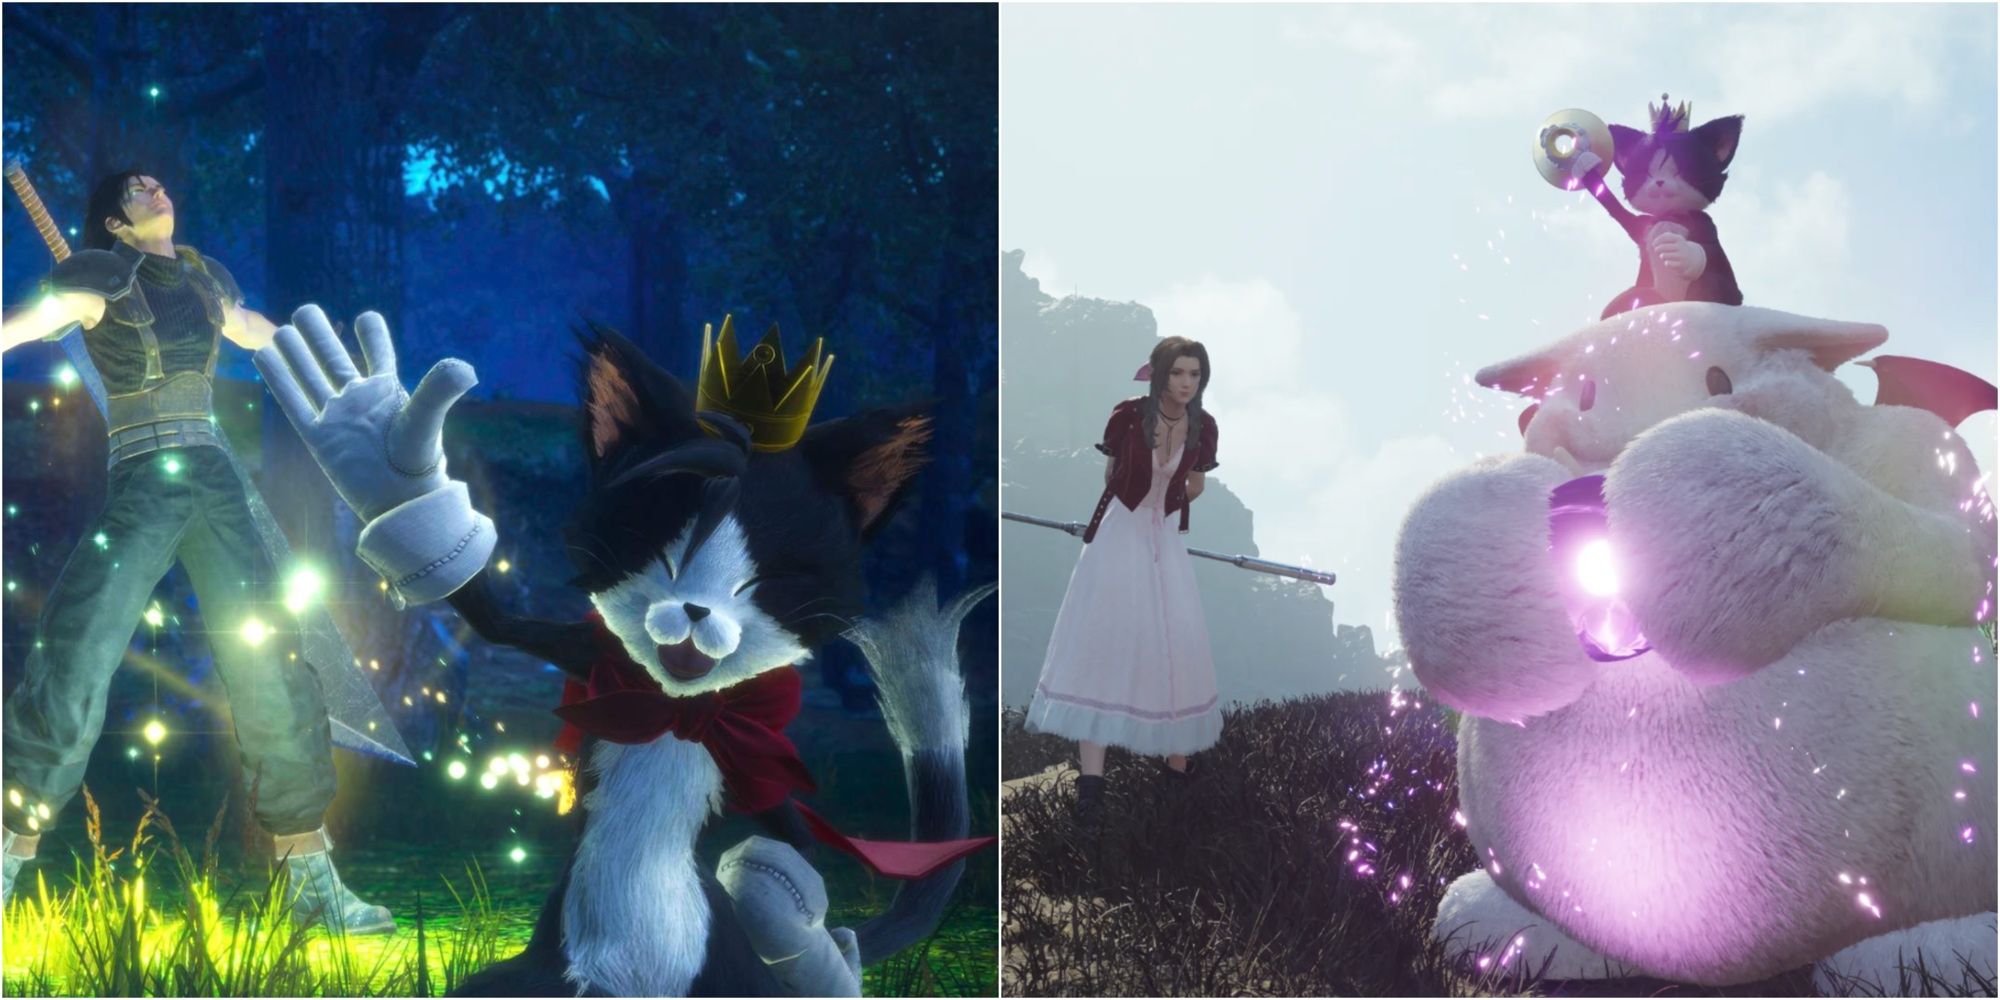 Cait Sith, Zack, And Aerith